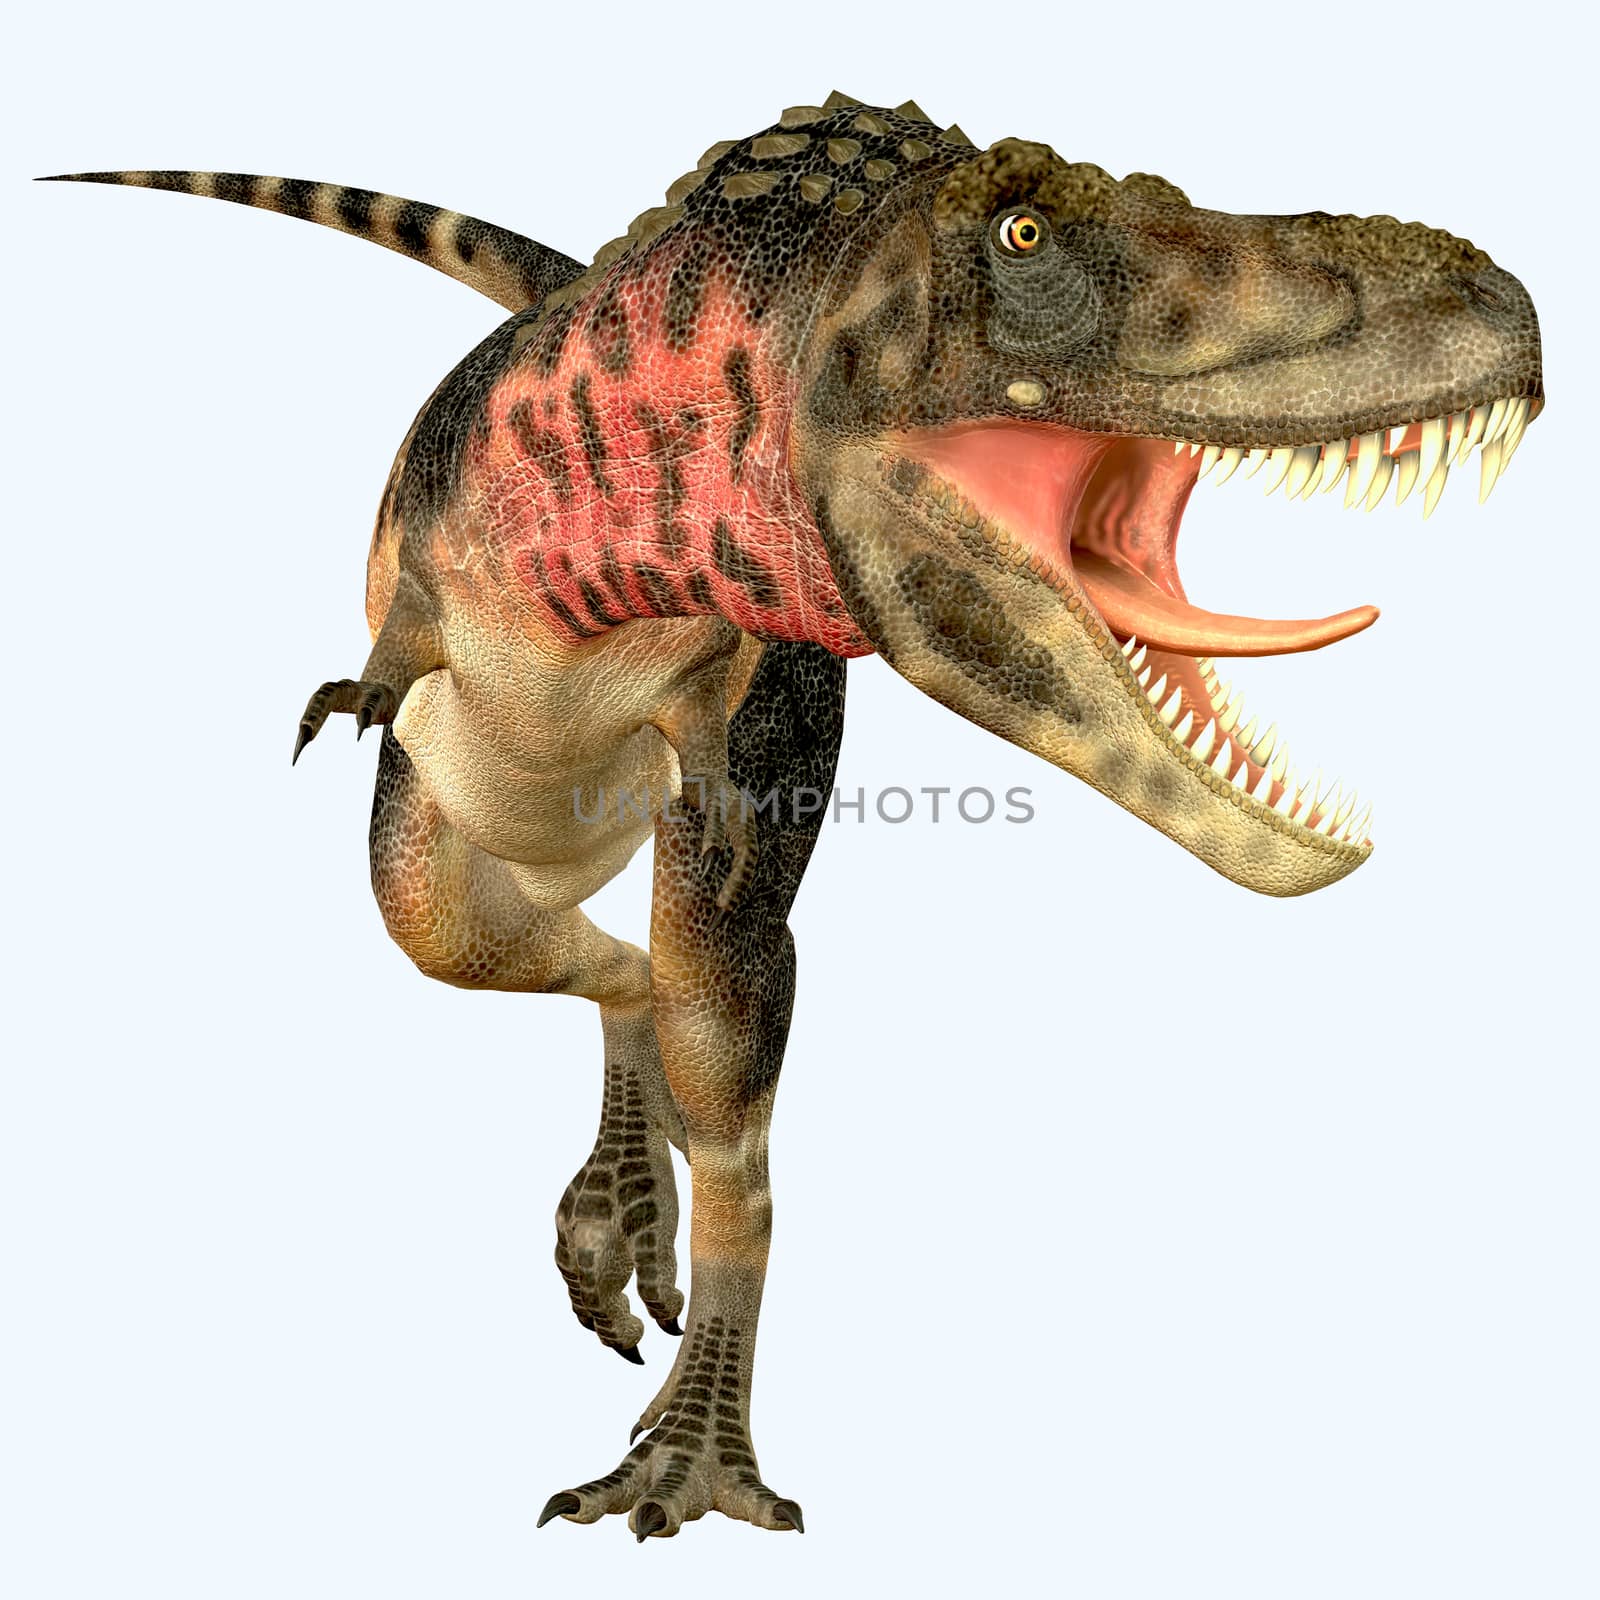 Tarbosaurus was a carnivorous theropod dinosaur that lived during the Cretaceous Period of Asia.